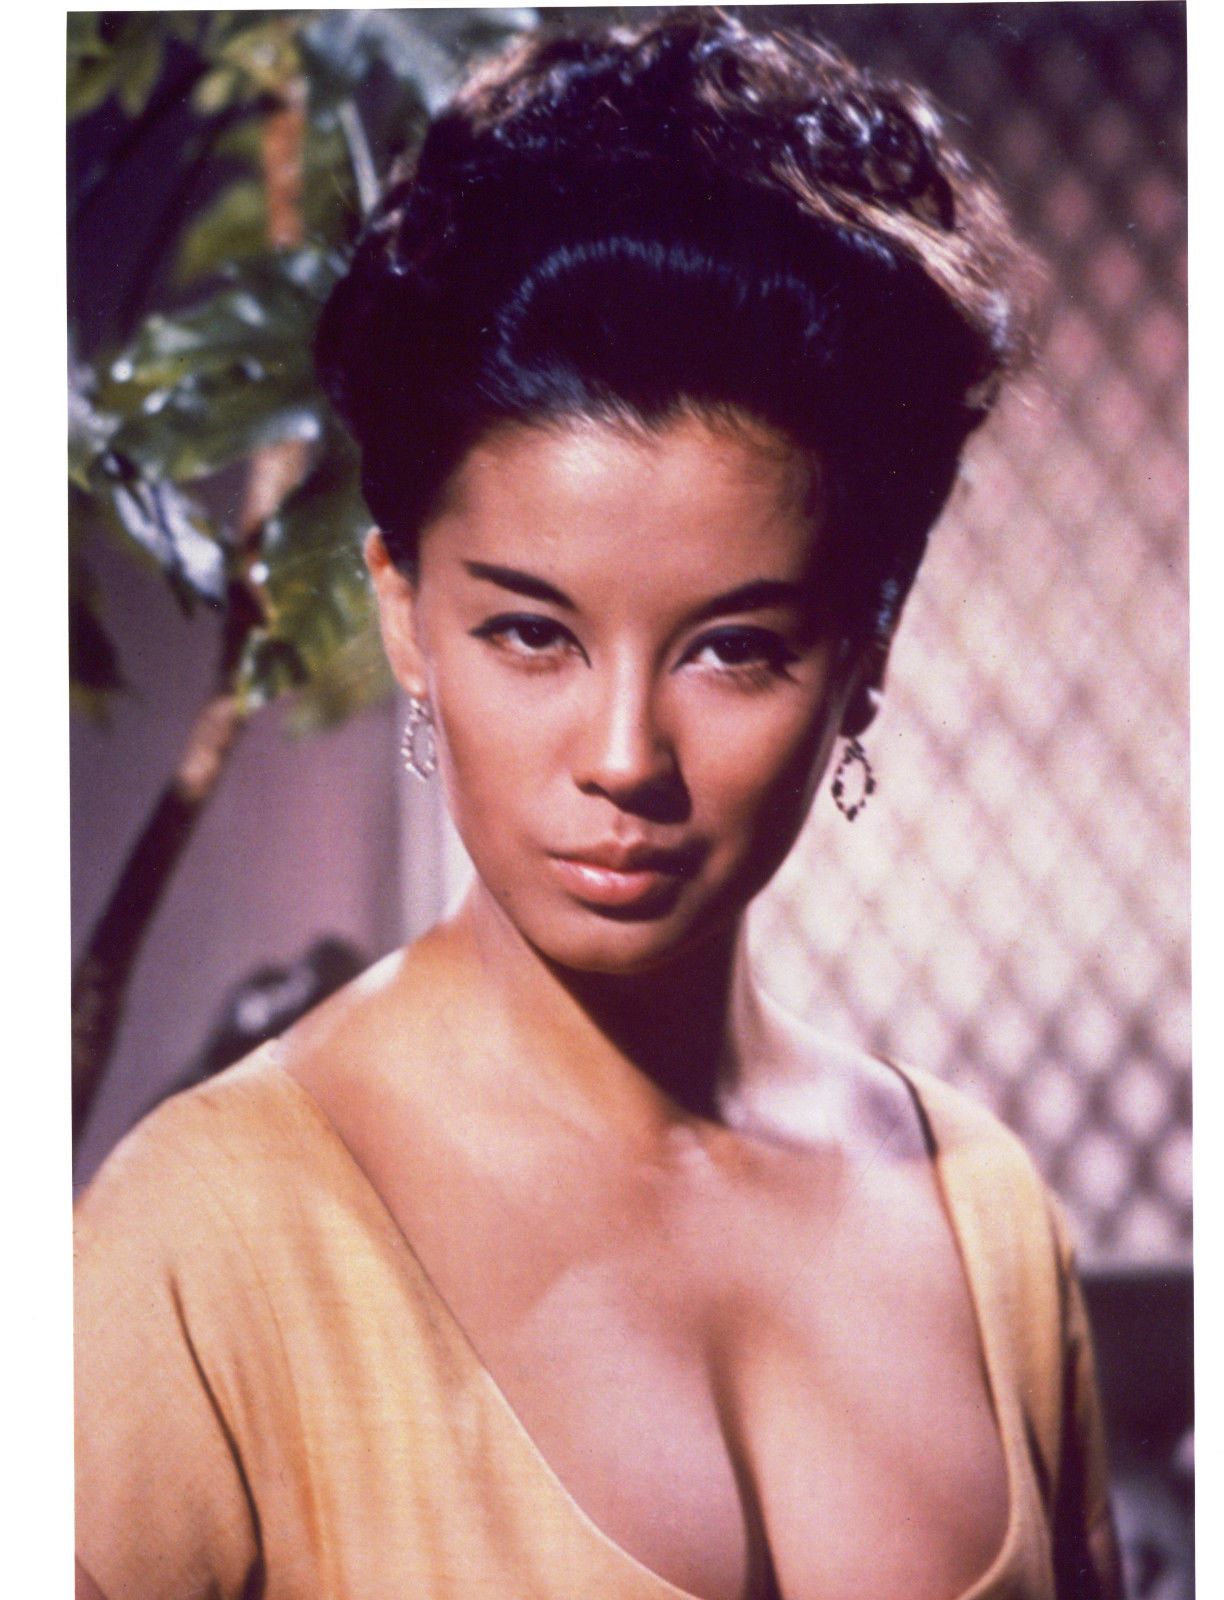 derrick stanford recommends france nuyen nude pic